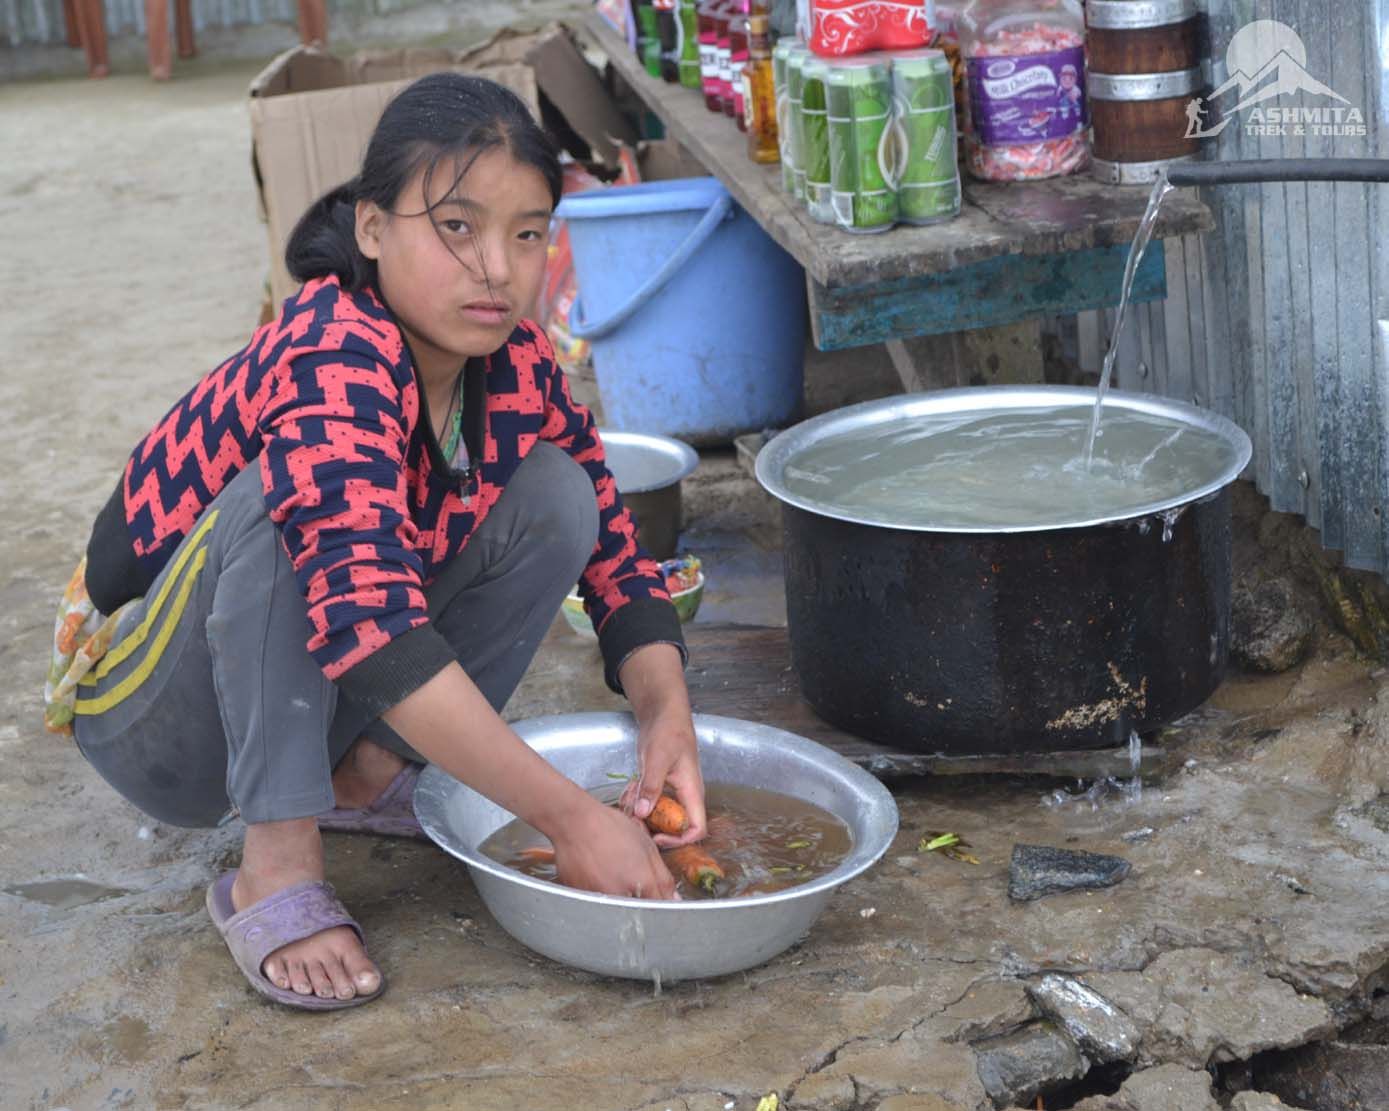 Local resident of the village washing the organic carrot